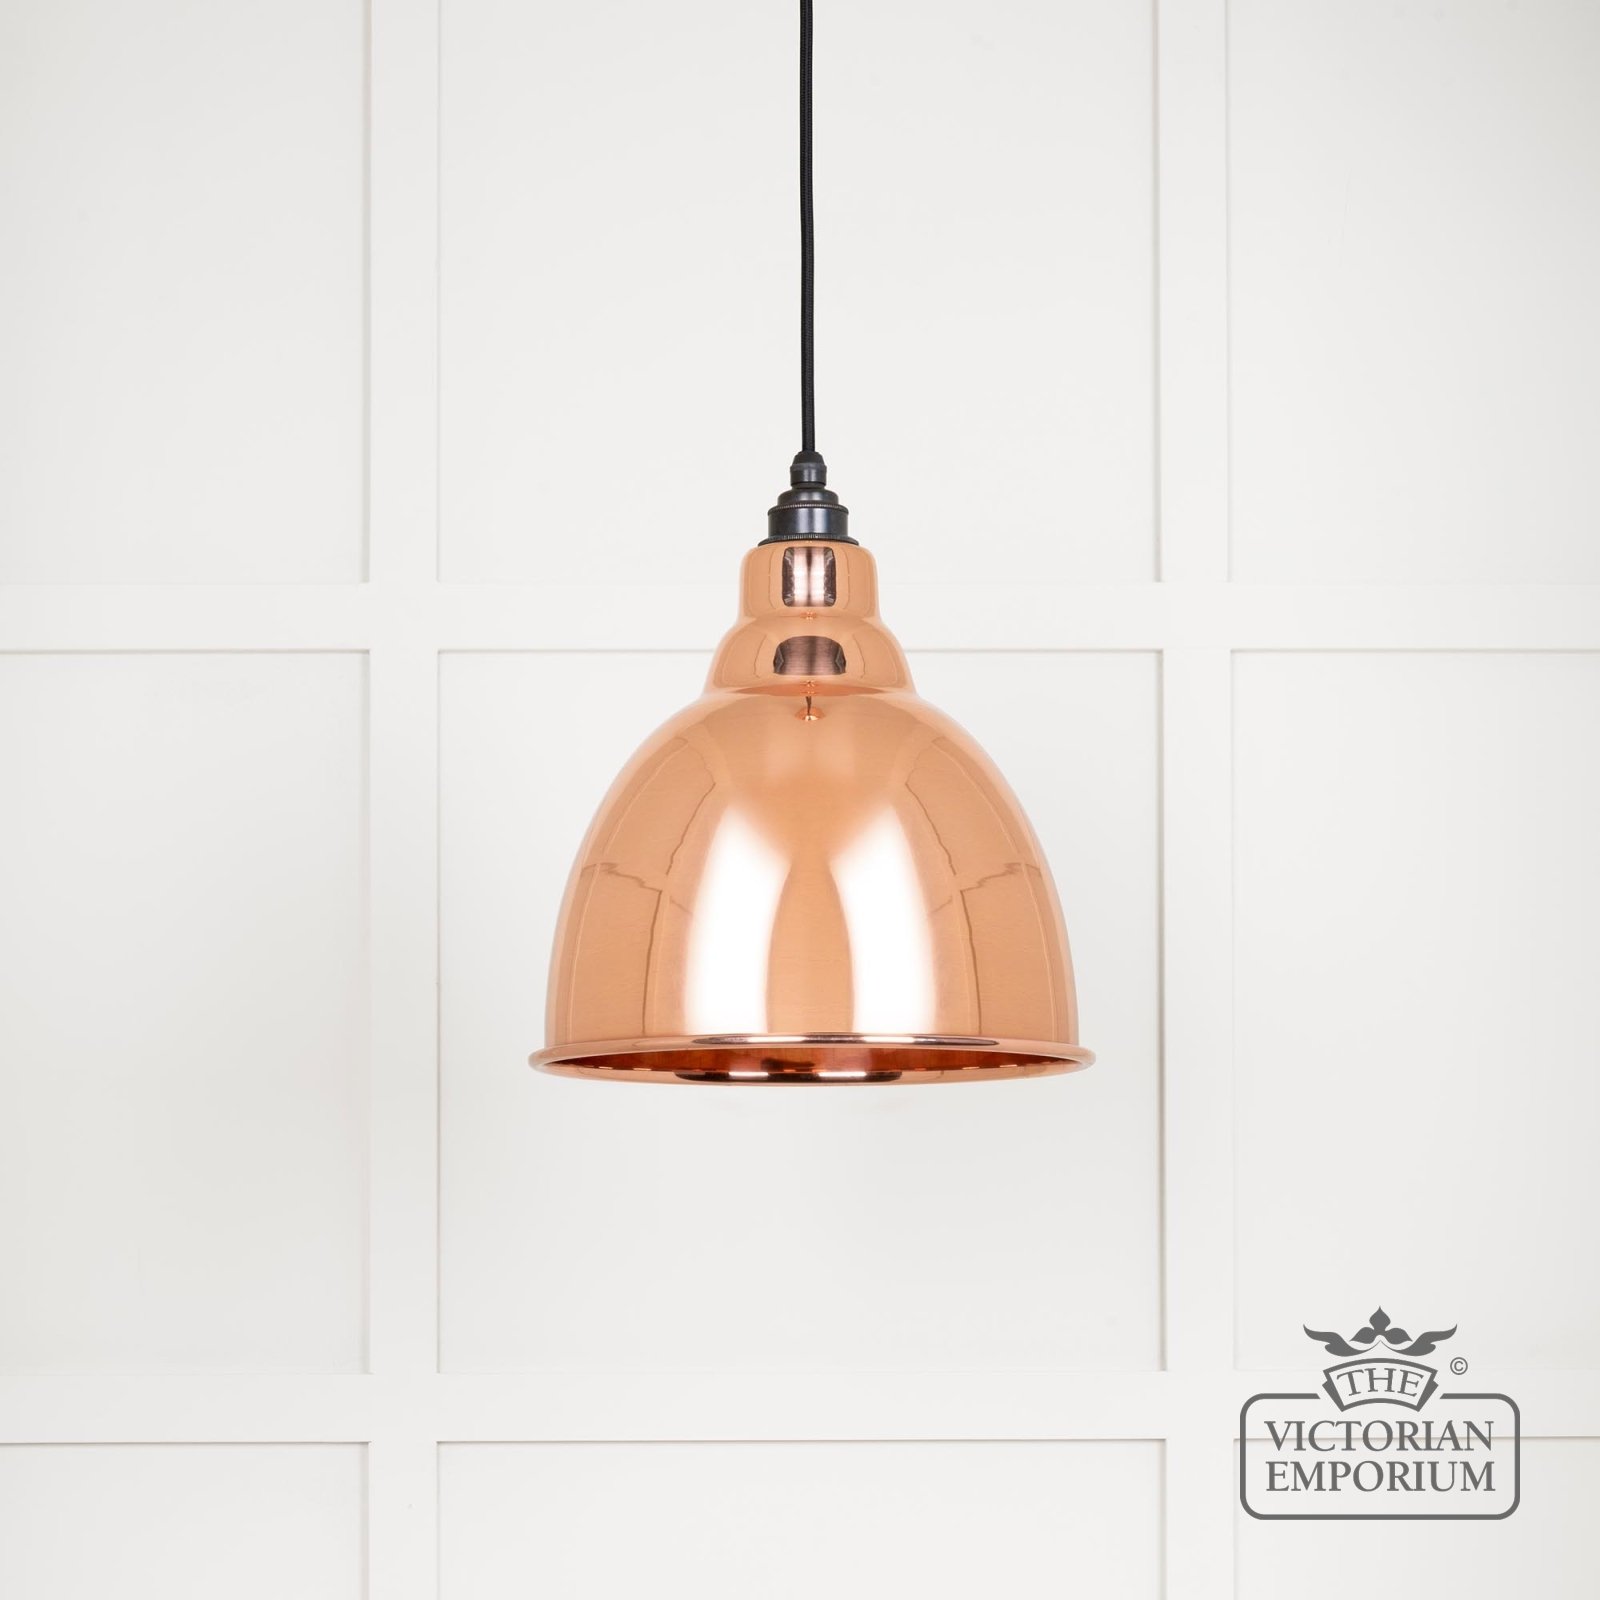 Brindle pendant light in smooth copper